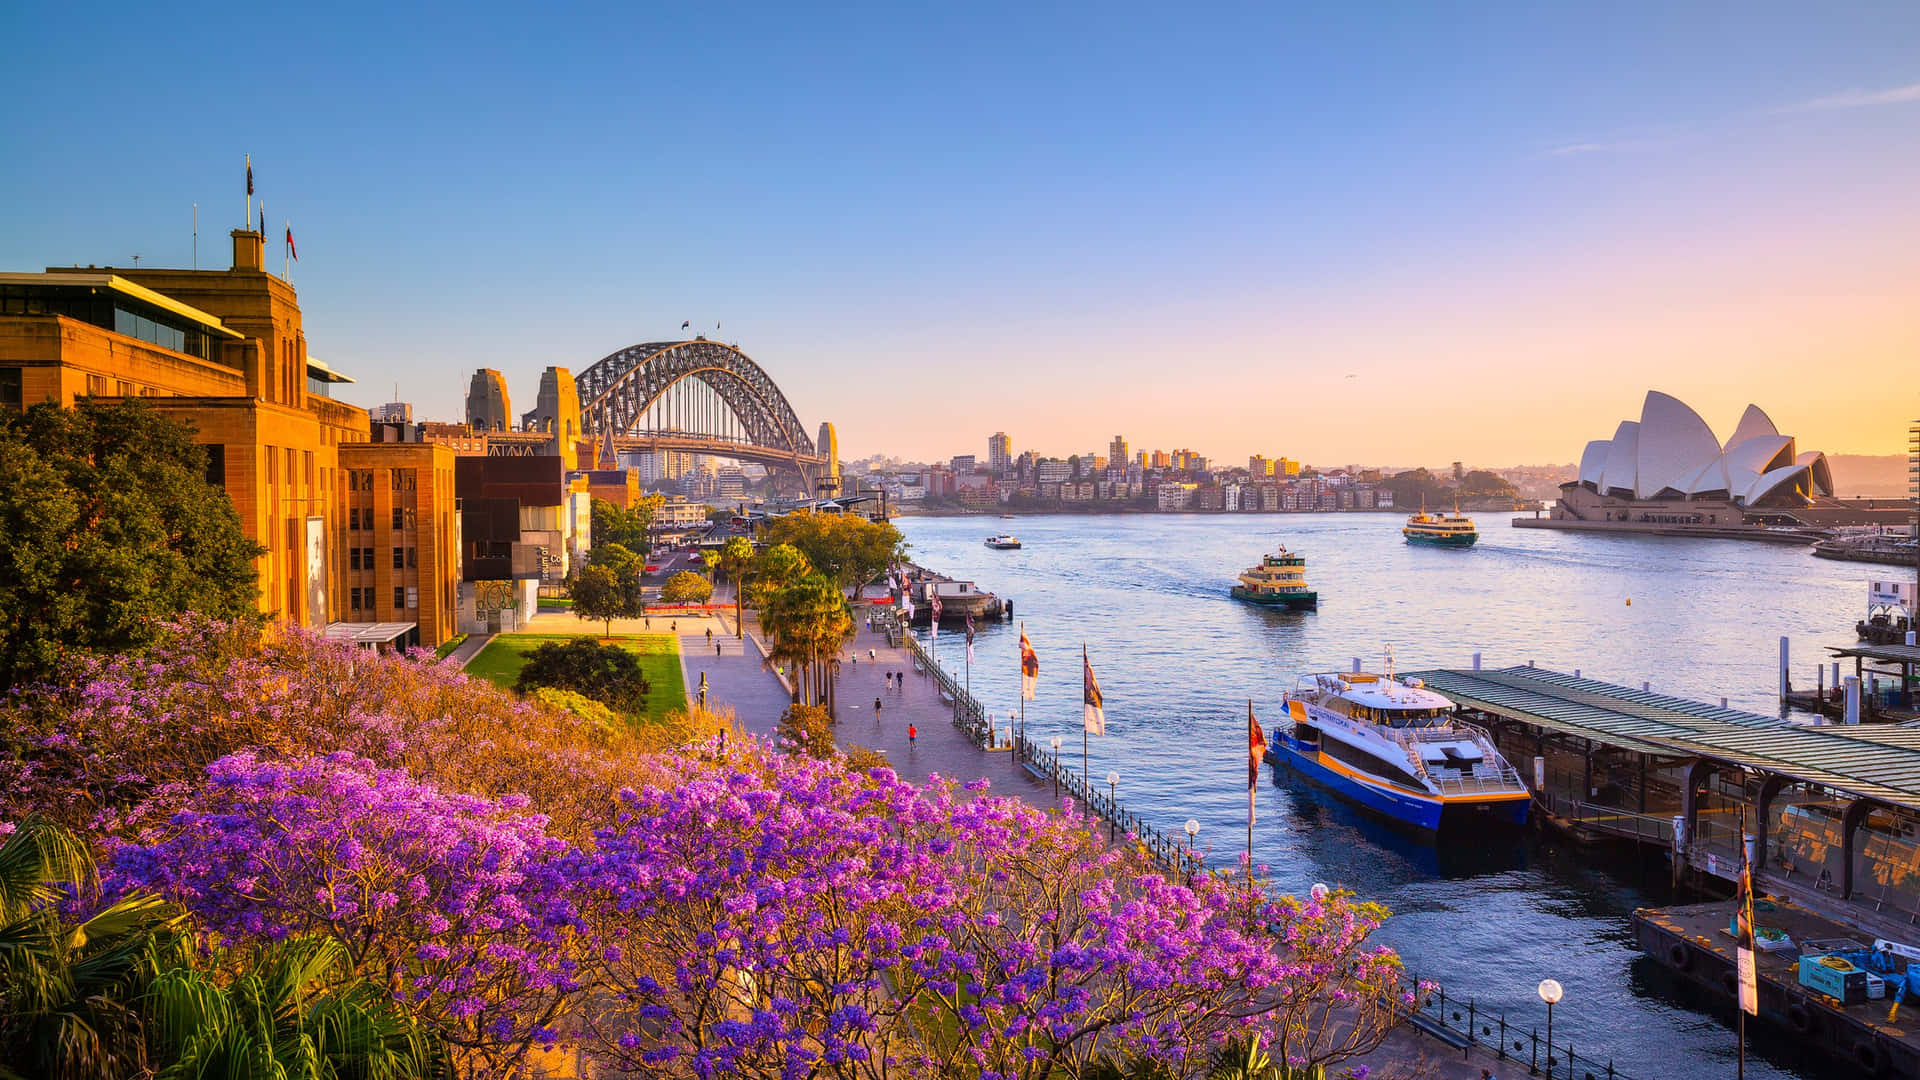 Sydney Harbour Sunset Cruise View Wallpaper